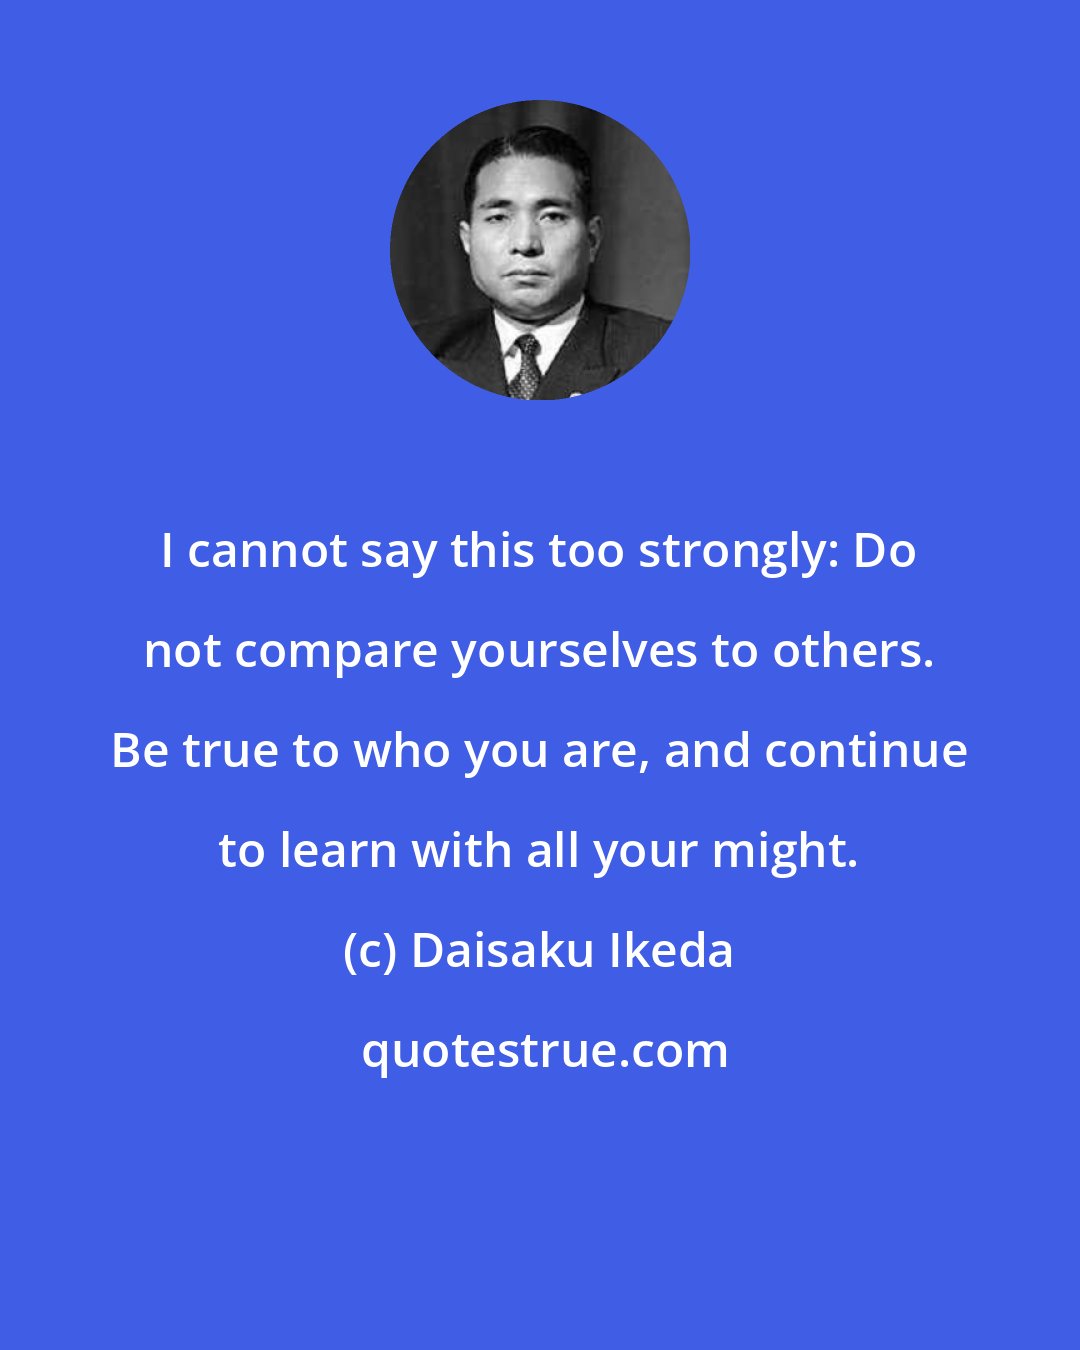 Daisaku Ikeda: I cannot say this too strongly: Do not compare yourselves to others. Be true to who you are, and continue to learn with all your might.